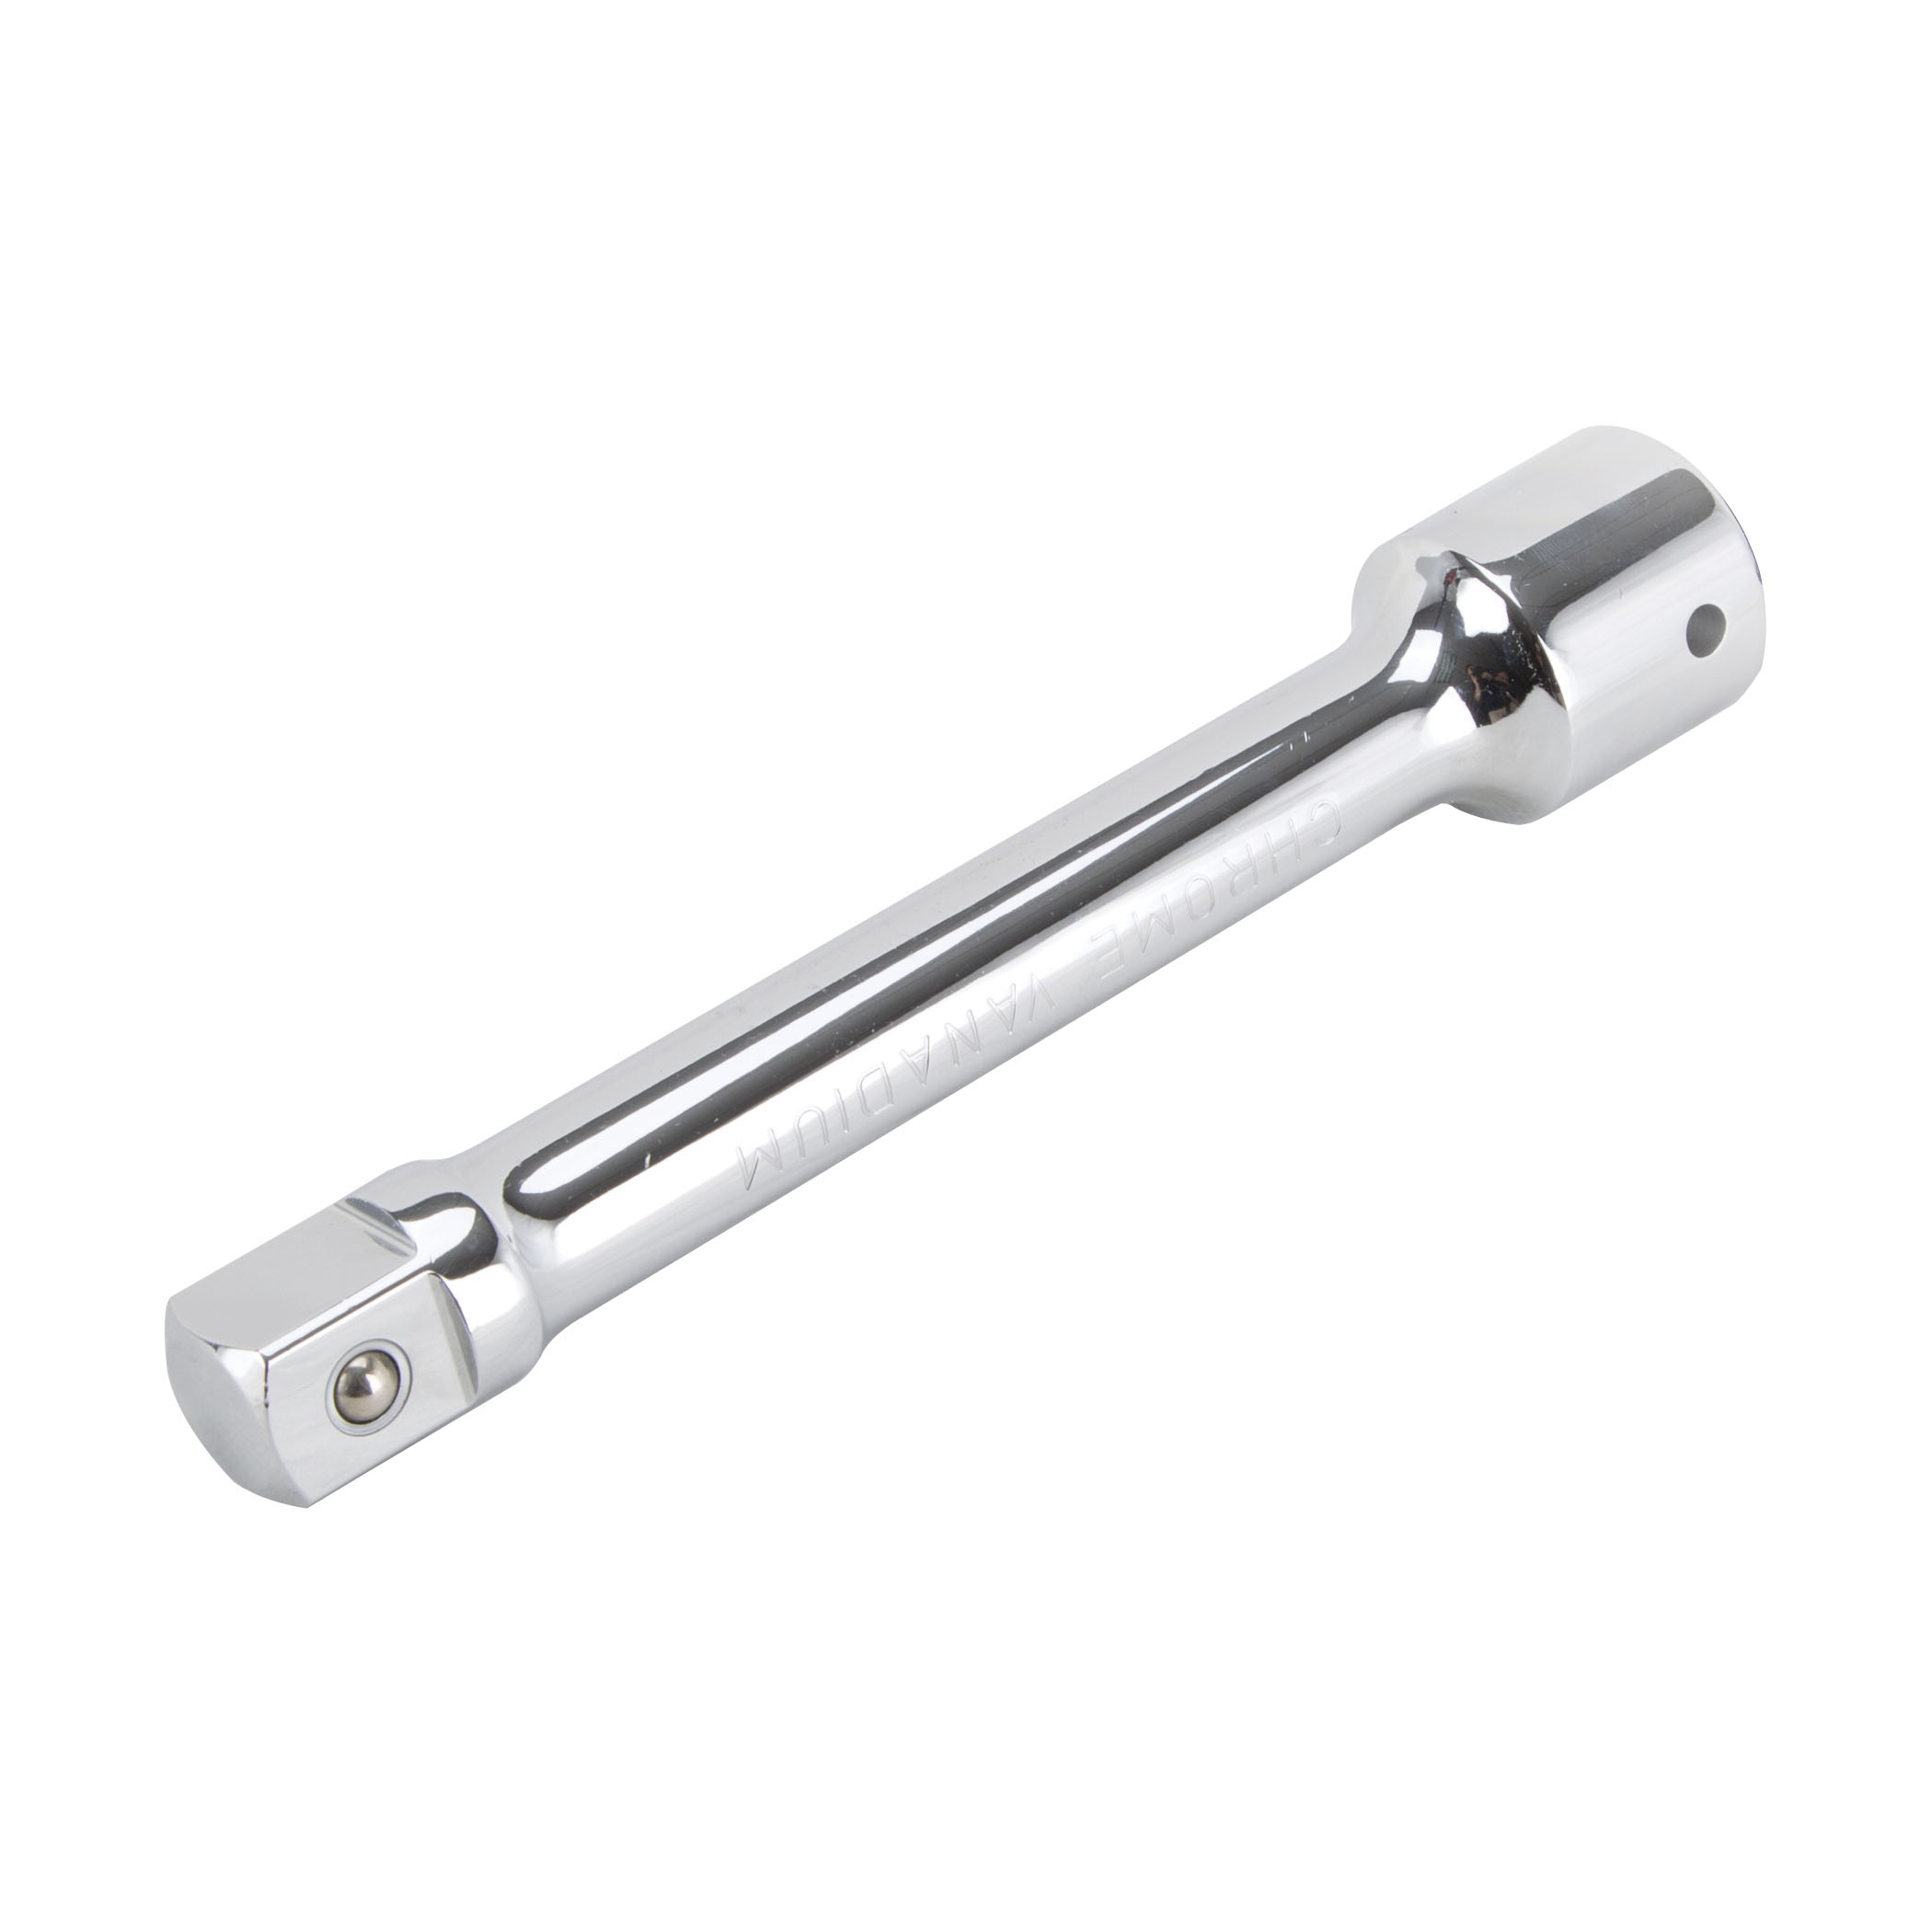 EB6008 Hang Tagged Extension Bar, 8 in L, Chrome